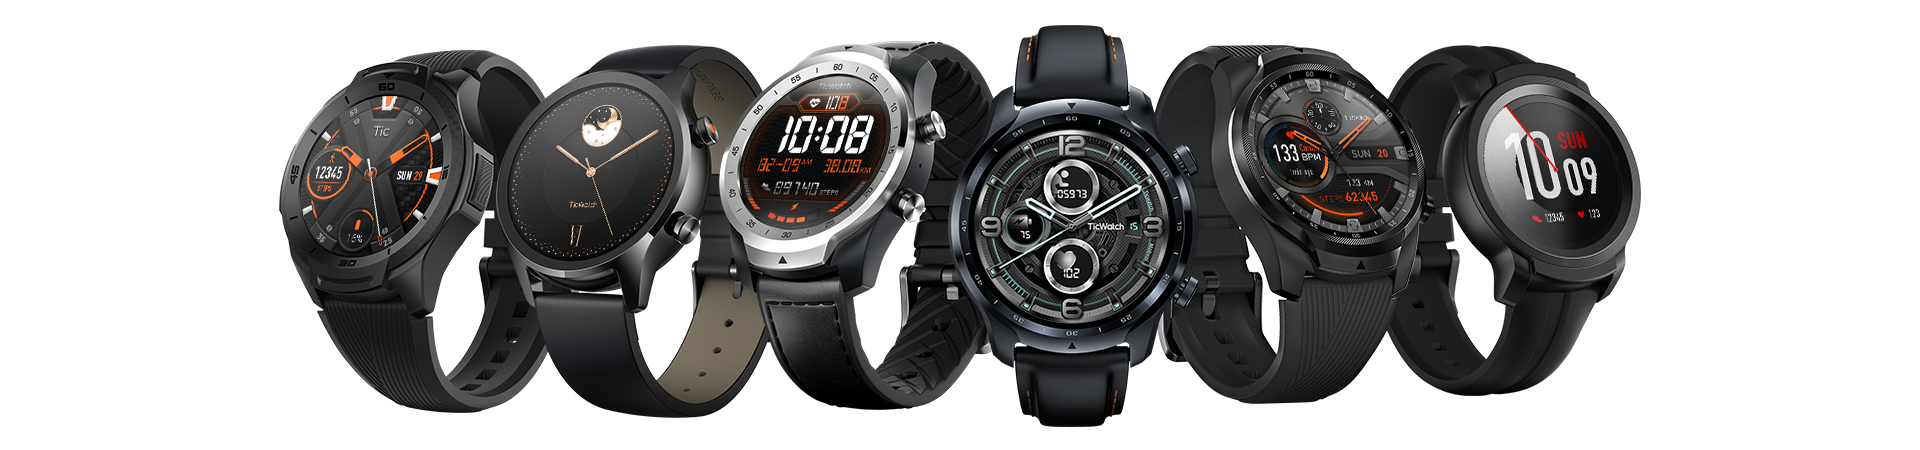 Ticwatch Pro 4g Lte Your Phone Free Active Smartwatch With Unbeatable Battery Life